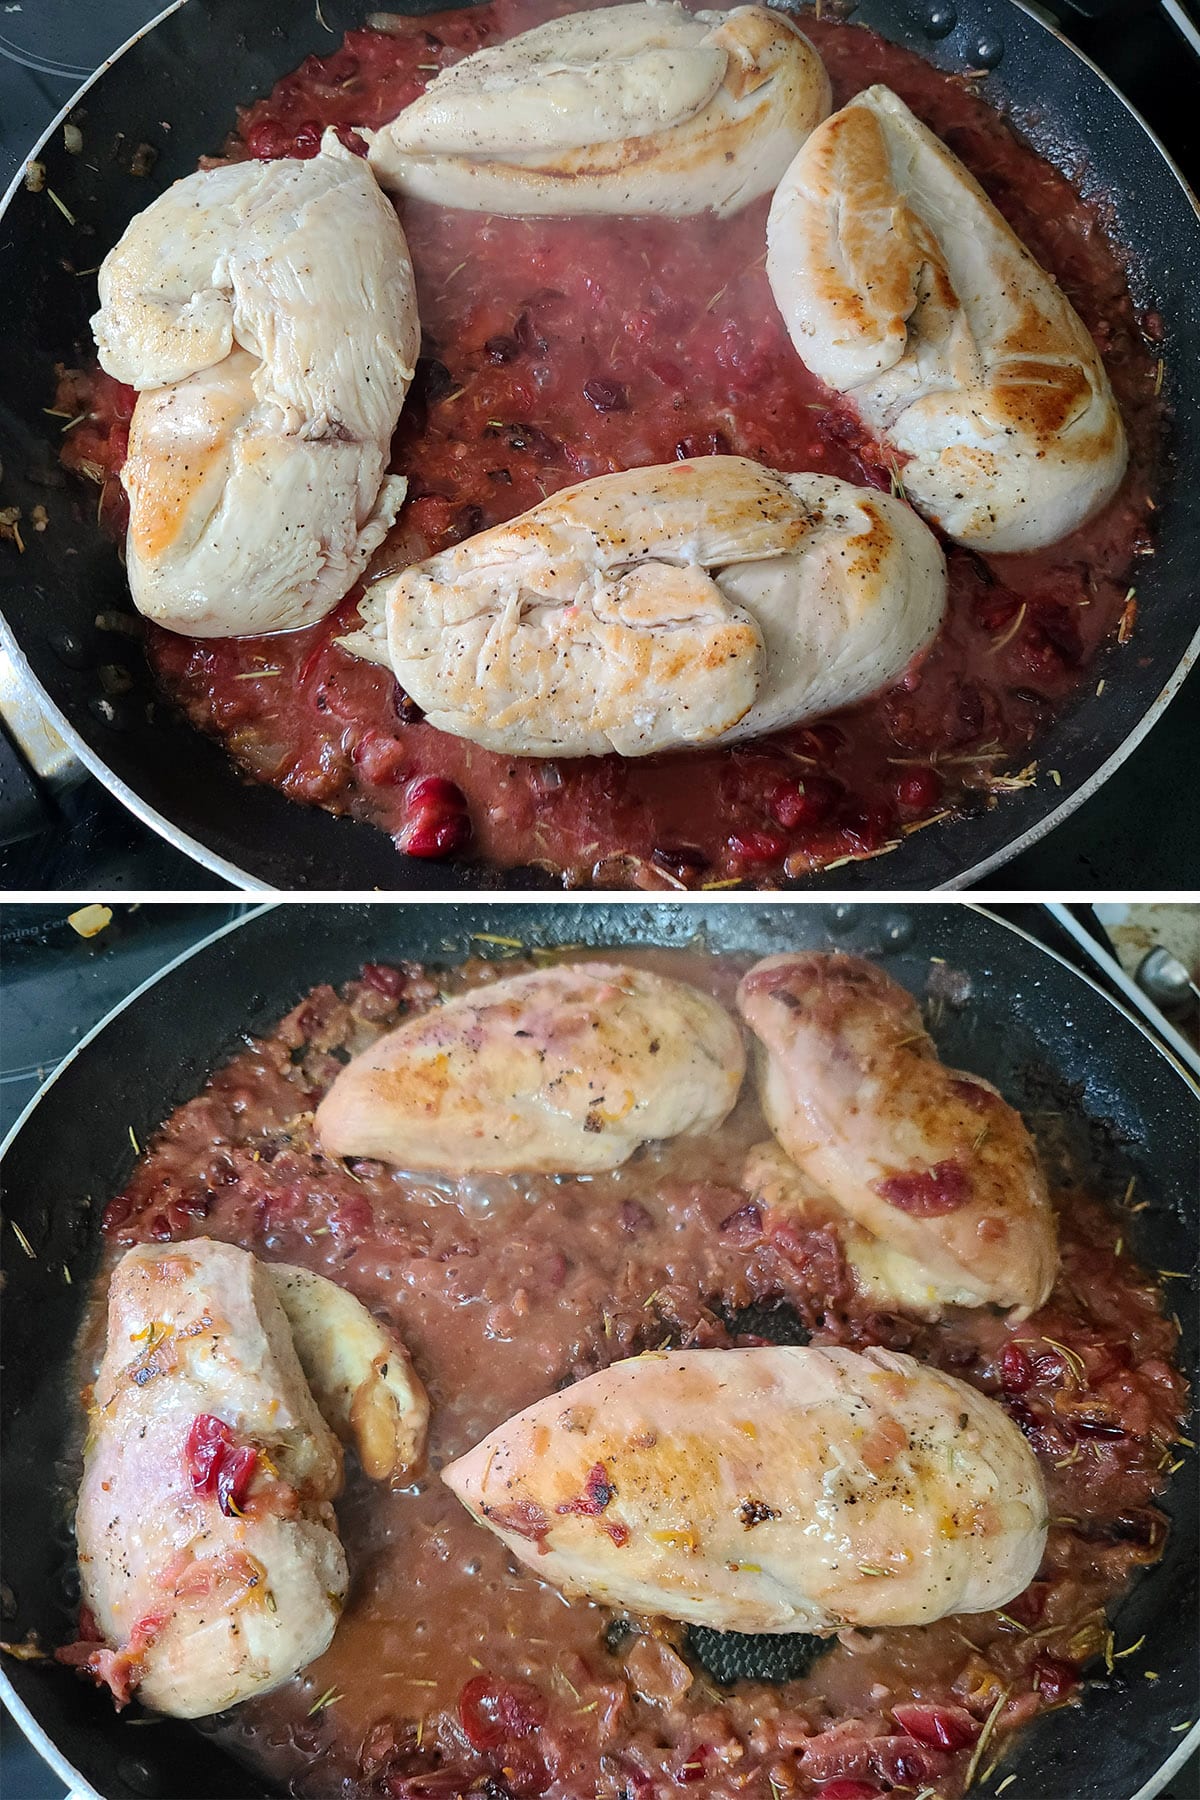 A 2 part image showing the chicken breasts cooking in the cranberry sauce.